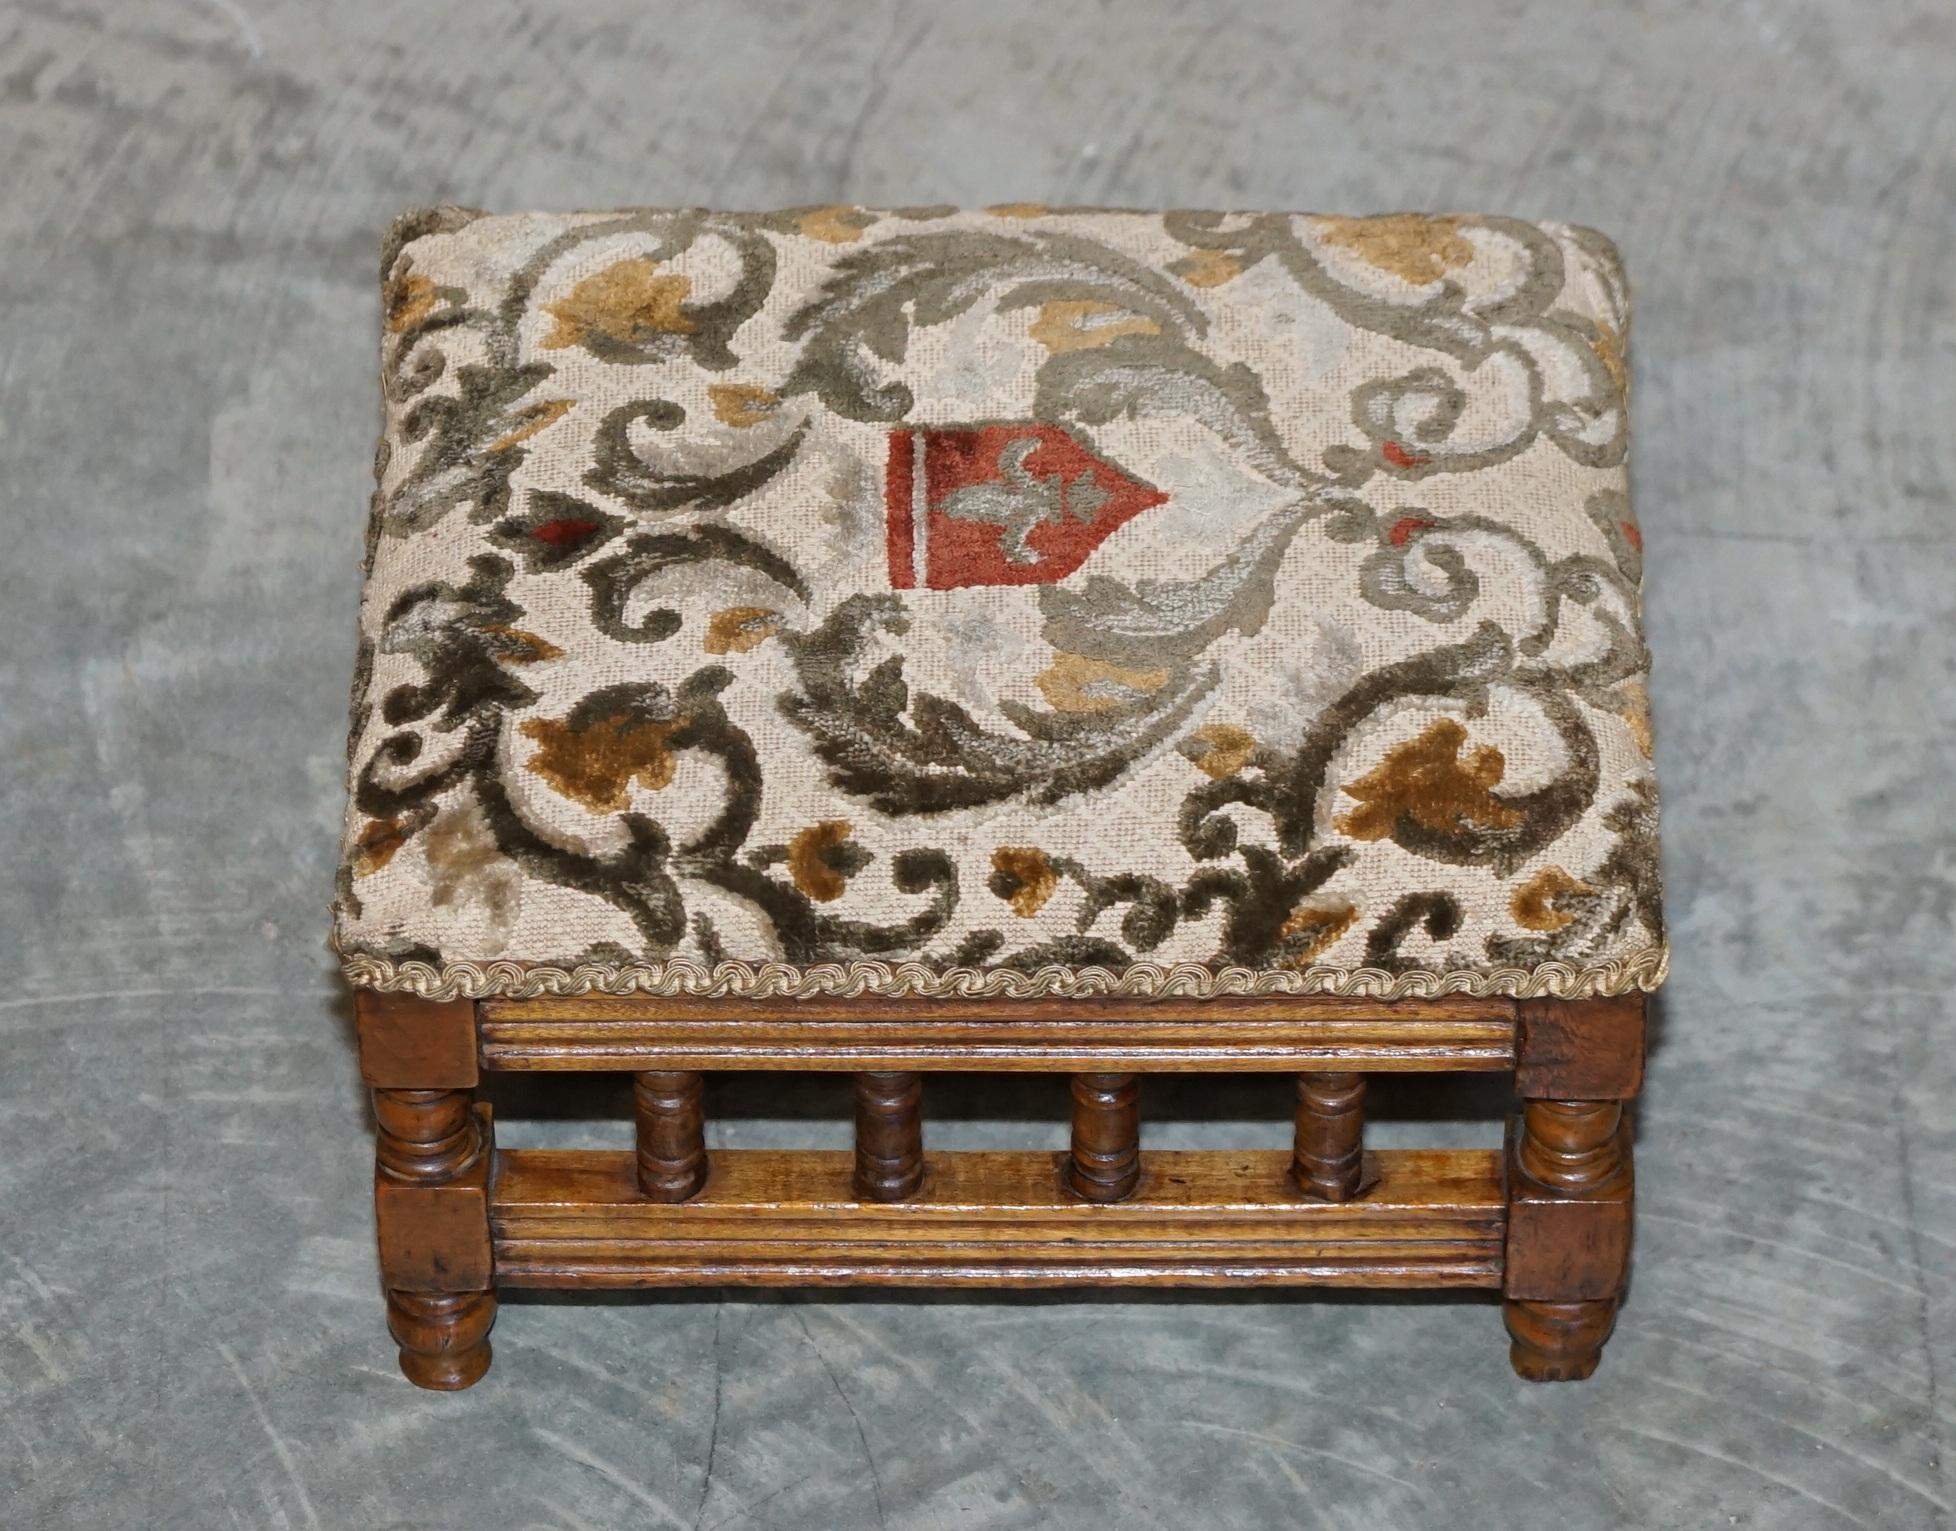 We are delighted to offer for sale this lovely small Maple & Co style Victorian Walnut with ornately Embroidered top, footstool

A good looking well made and decorative piece, the top has an almost armorial look and feel to it. These types of